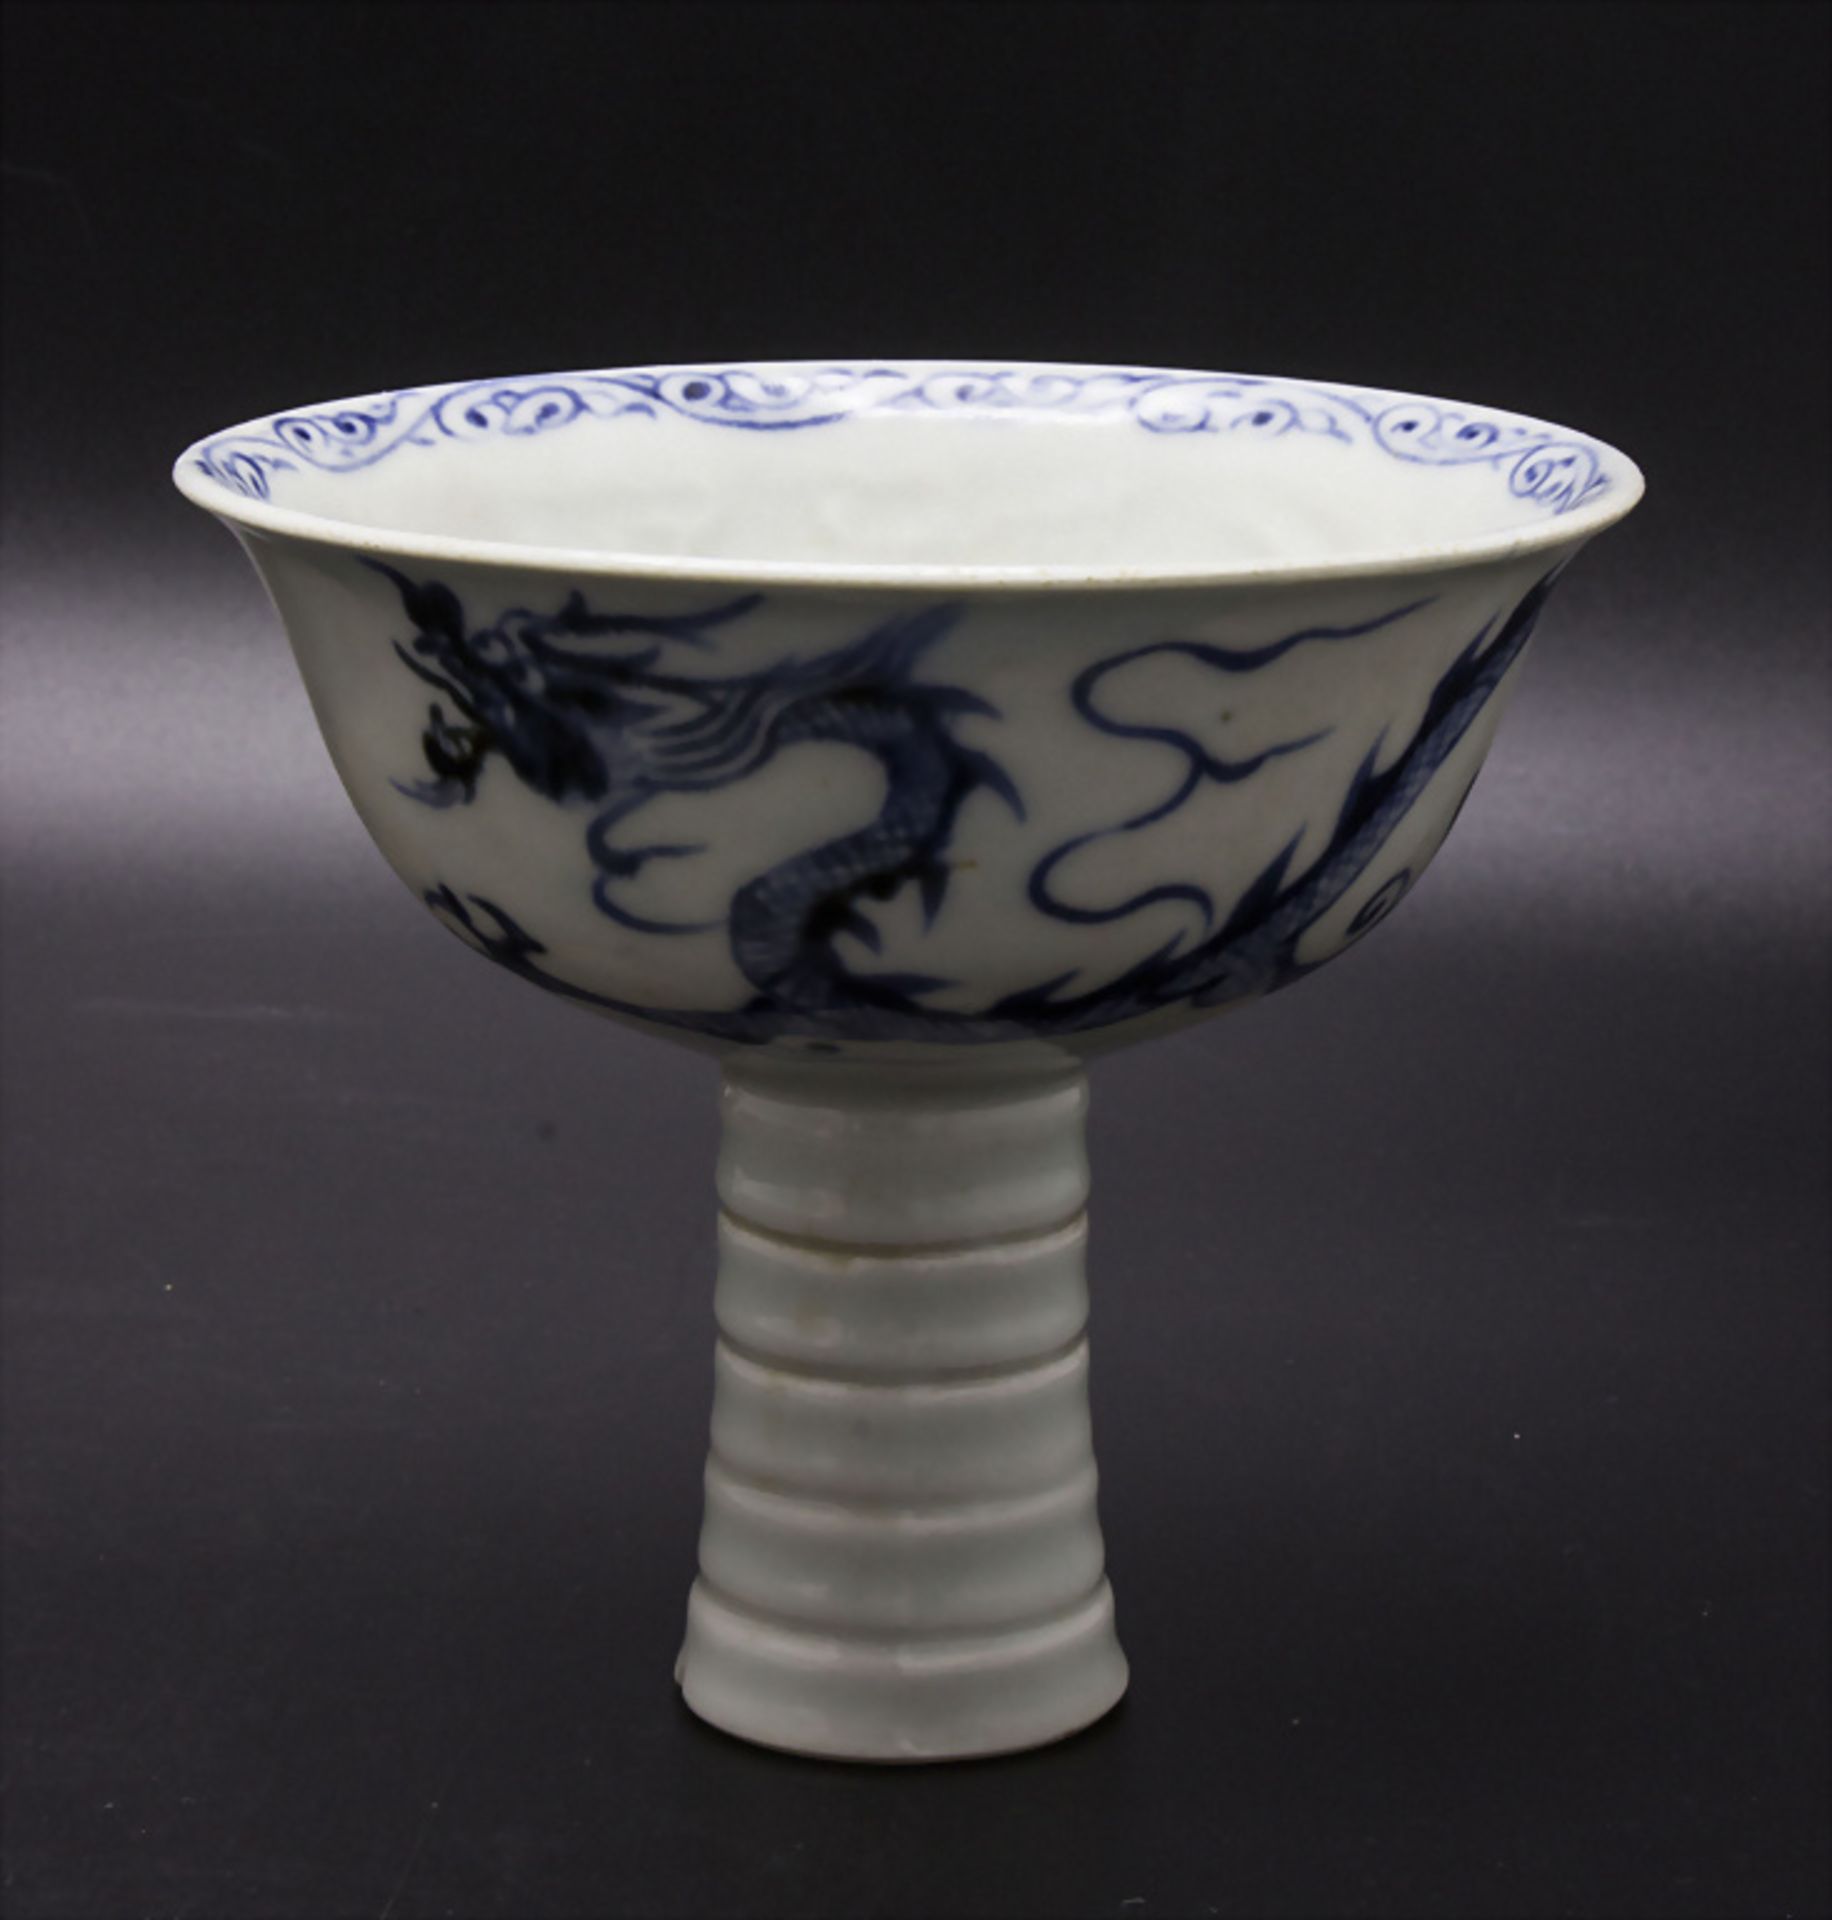 Stempelbecher im Yuan-Stil / A stamp cup in the style of Yuan, China, Qing-Zeit